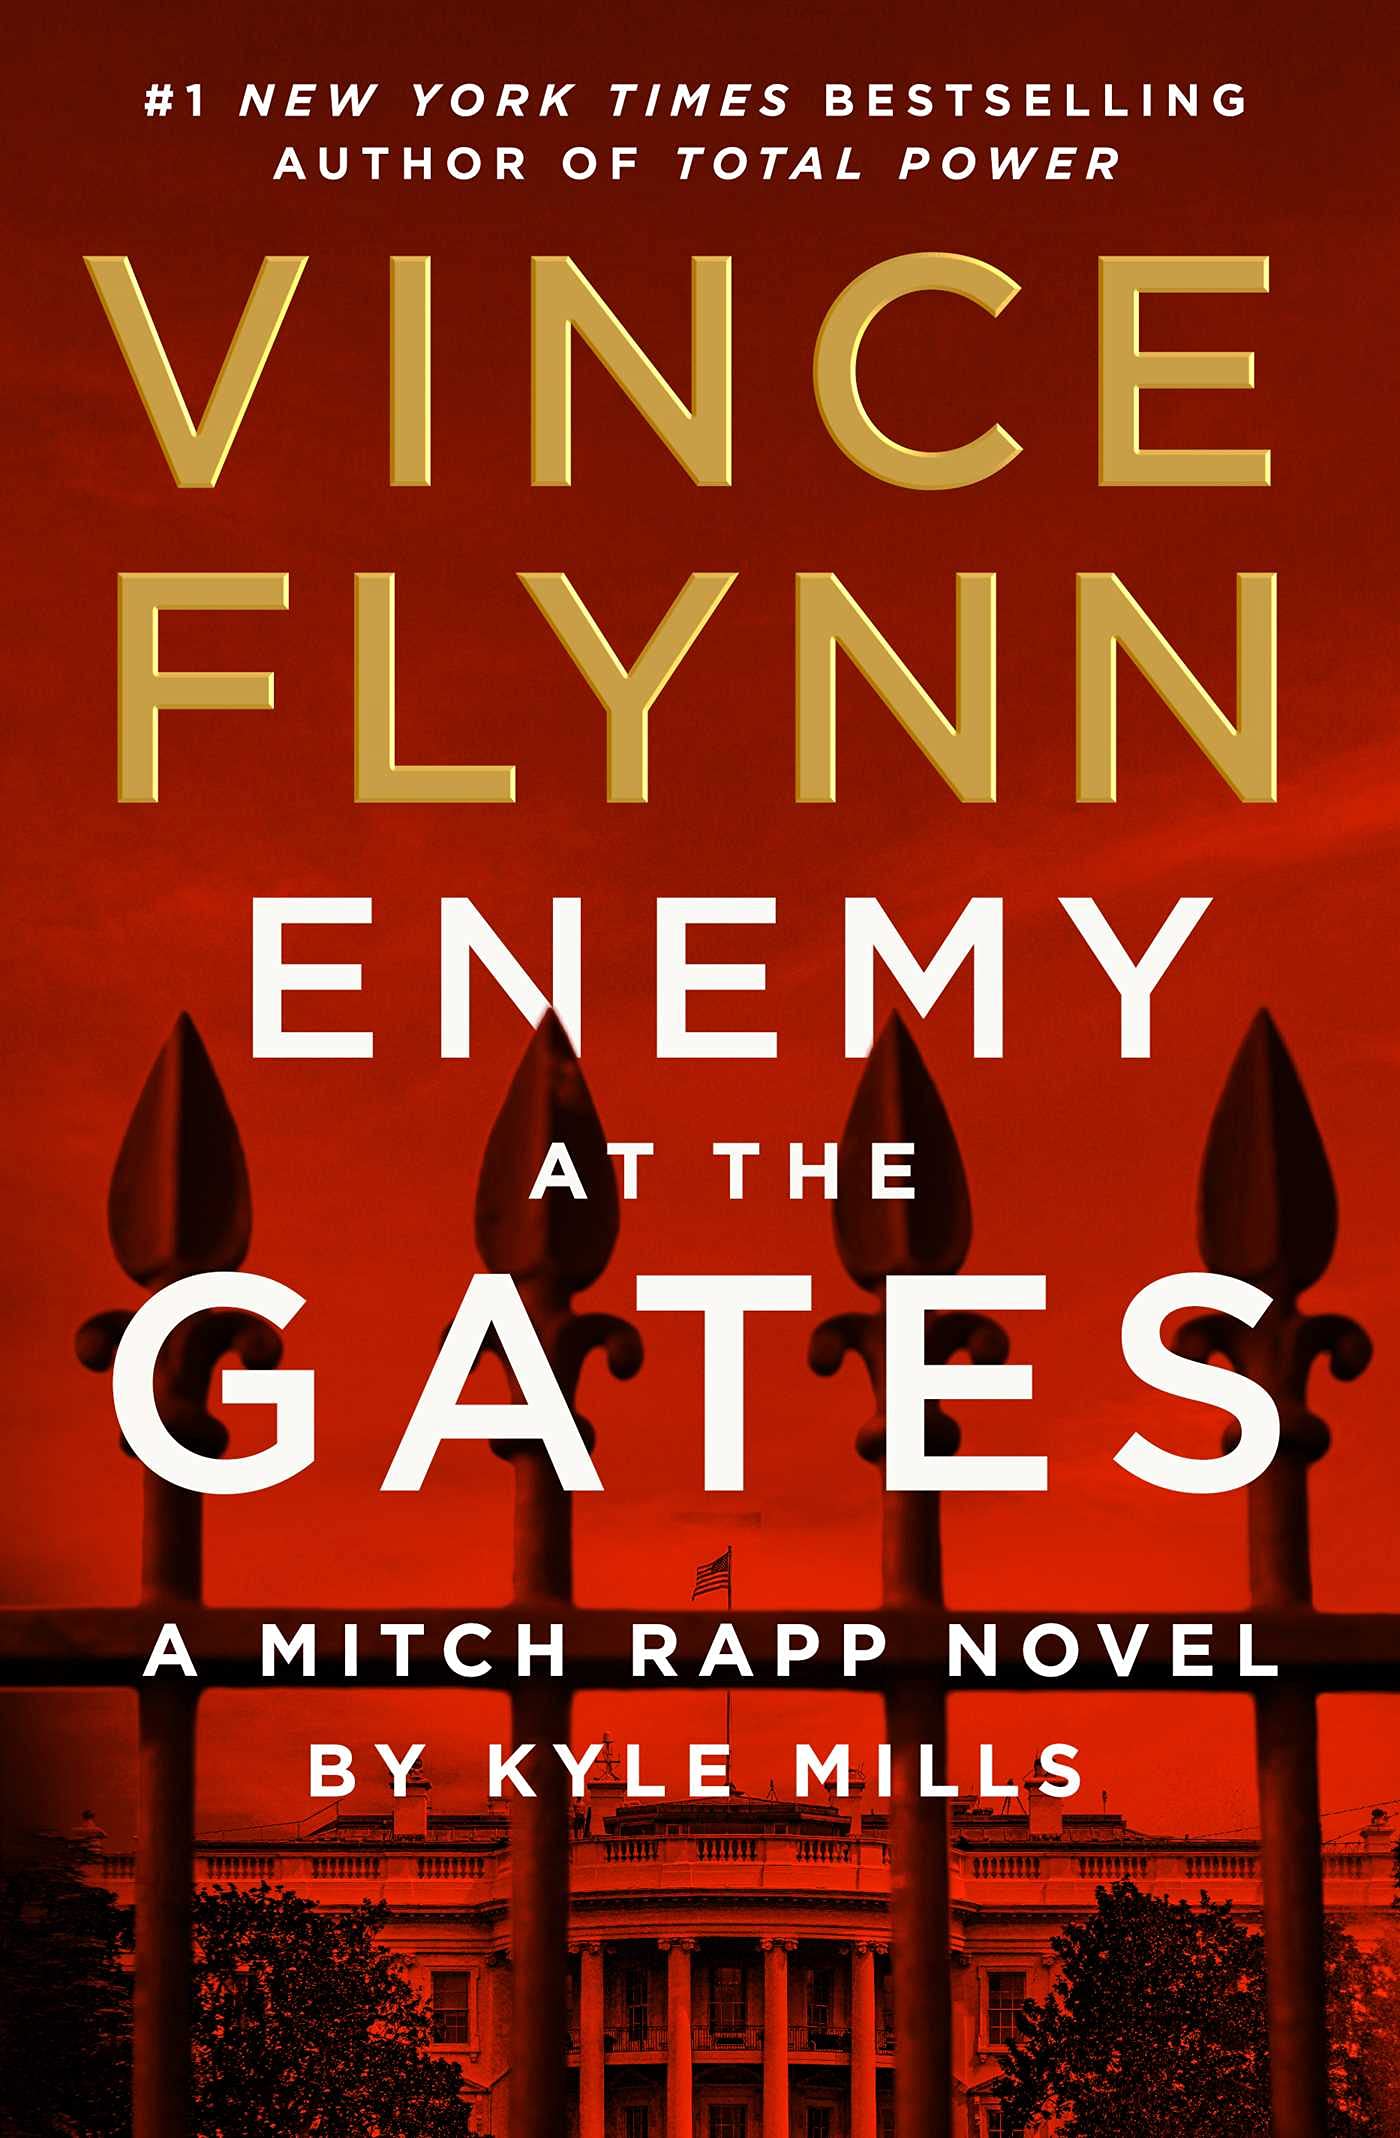 Image for "Enemy at the Gates"